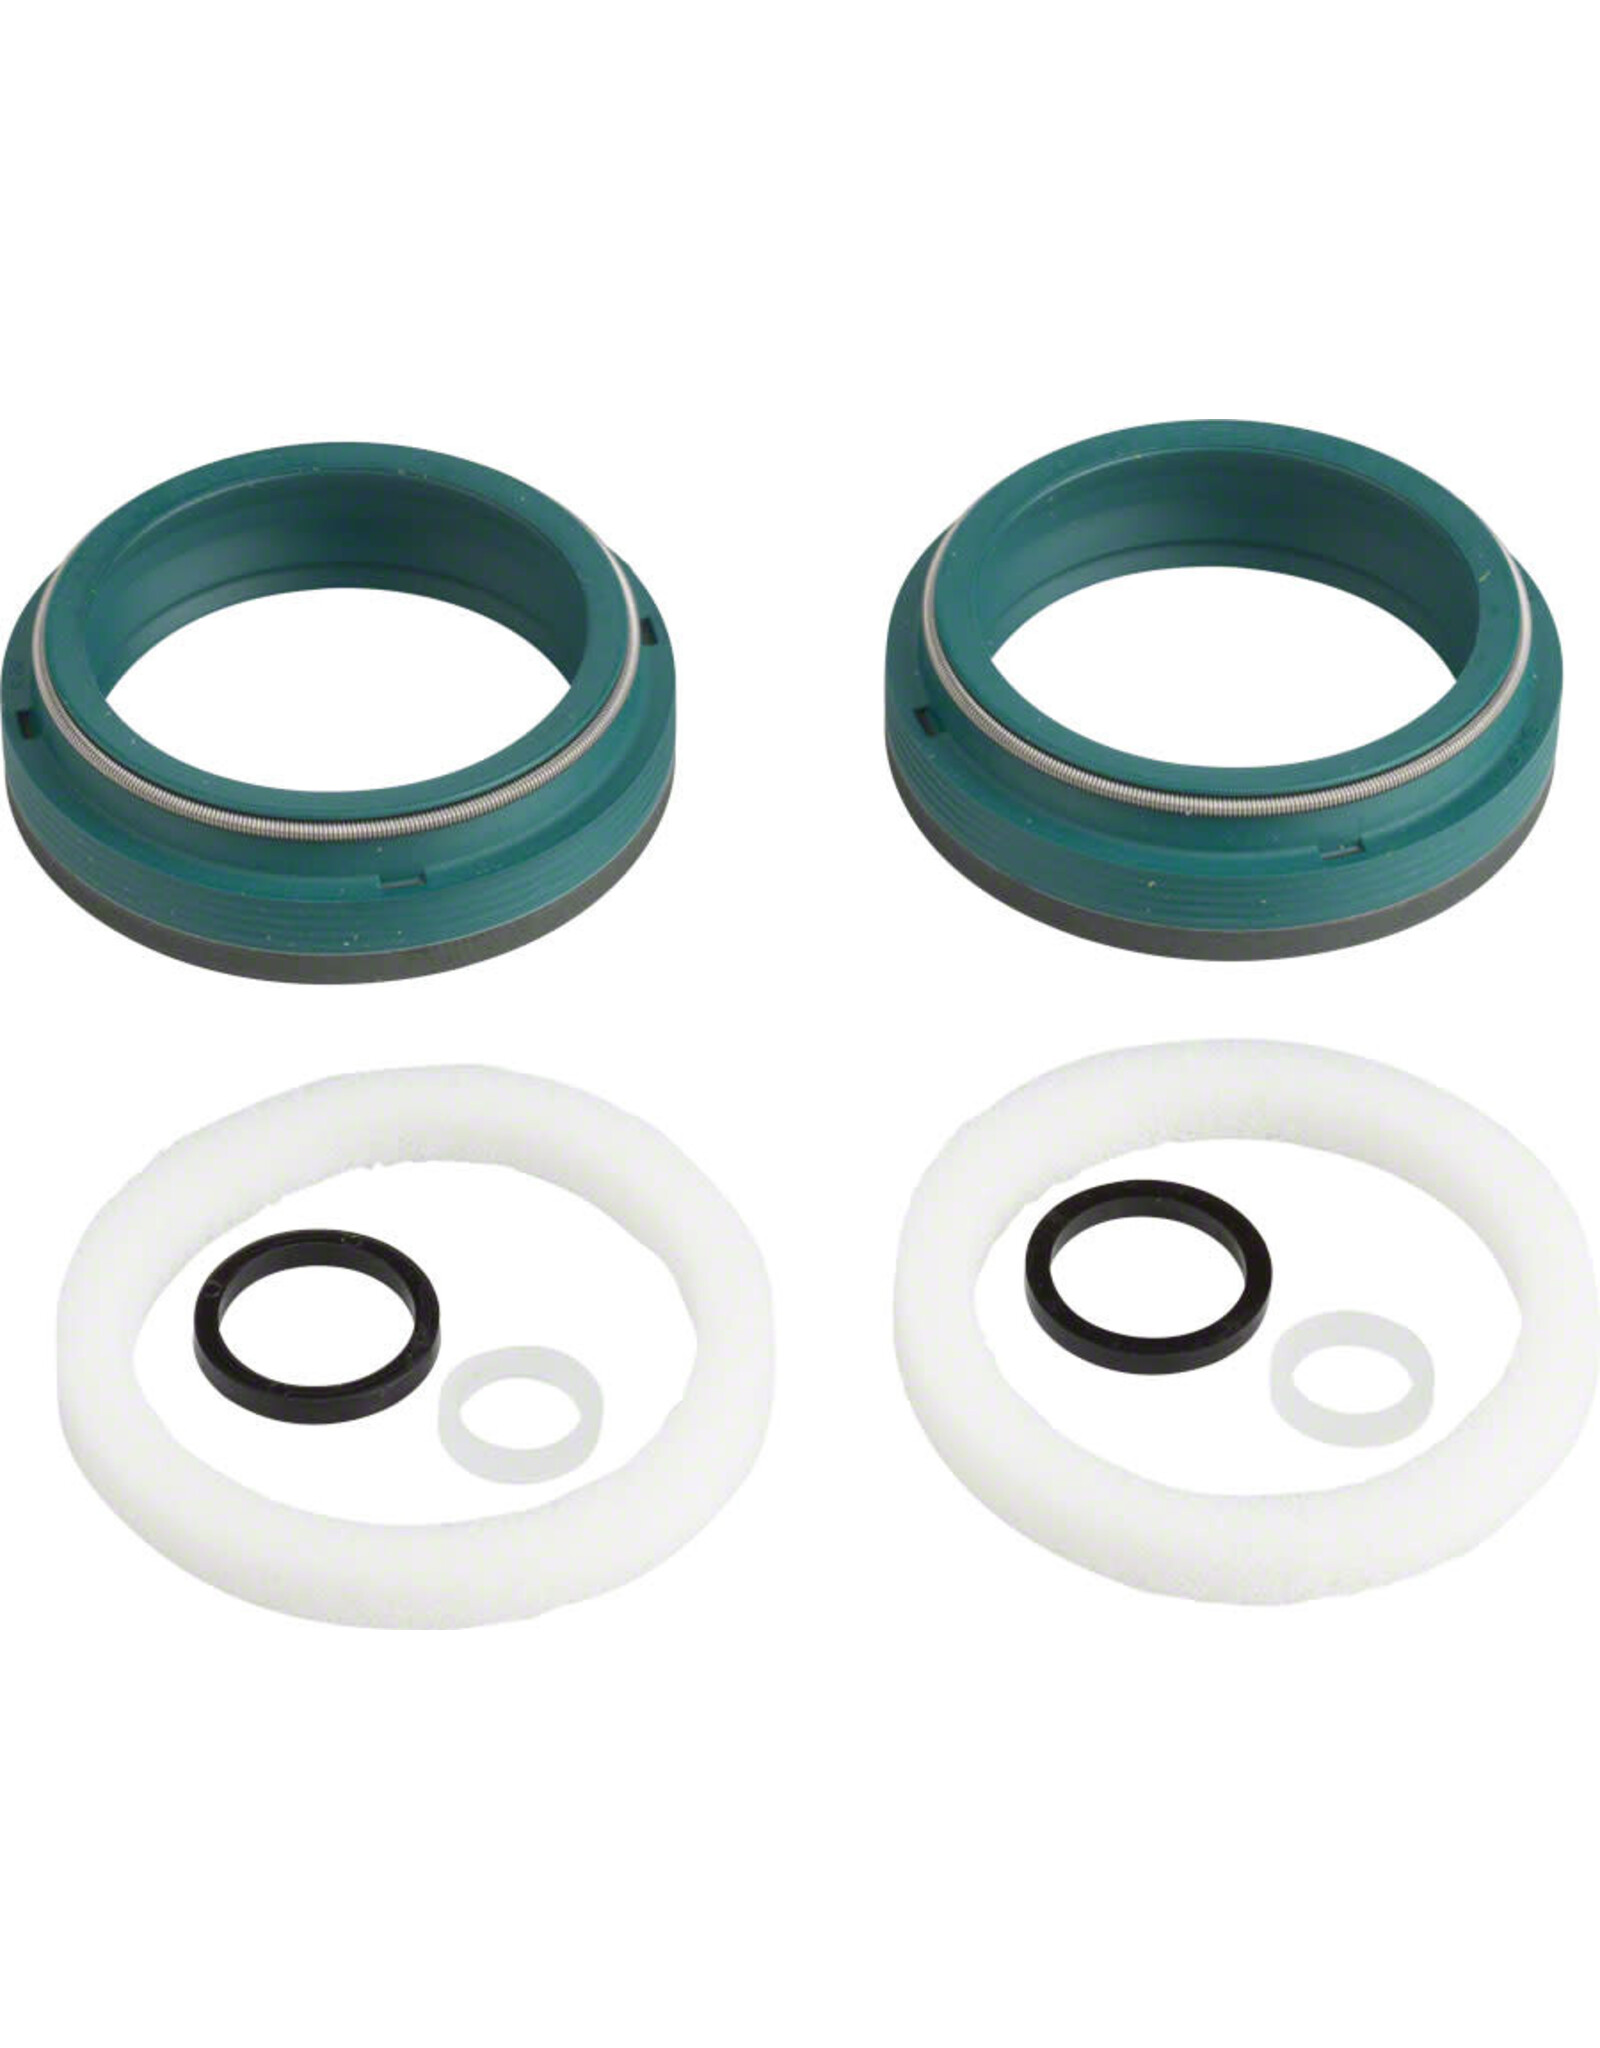 SKF SKF Low-Friction Dust Wiper Seal Kit: Fox 32mm, Fits 2016-Current Forks